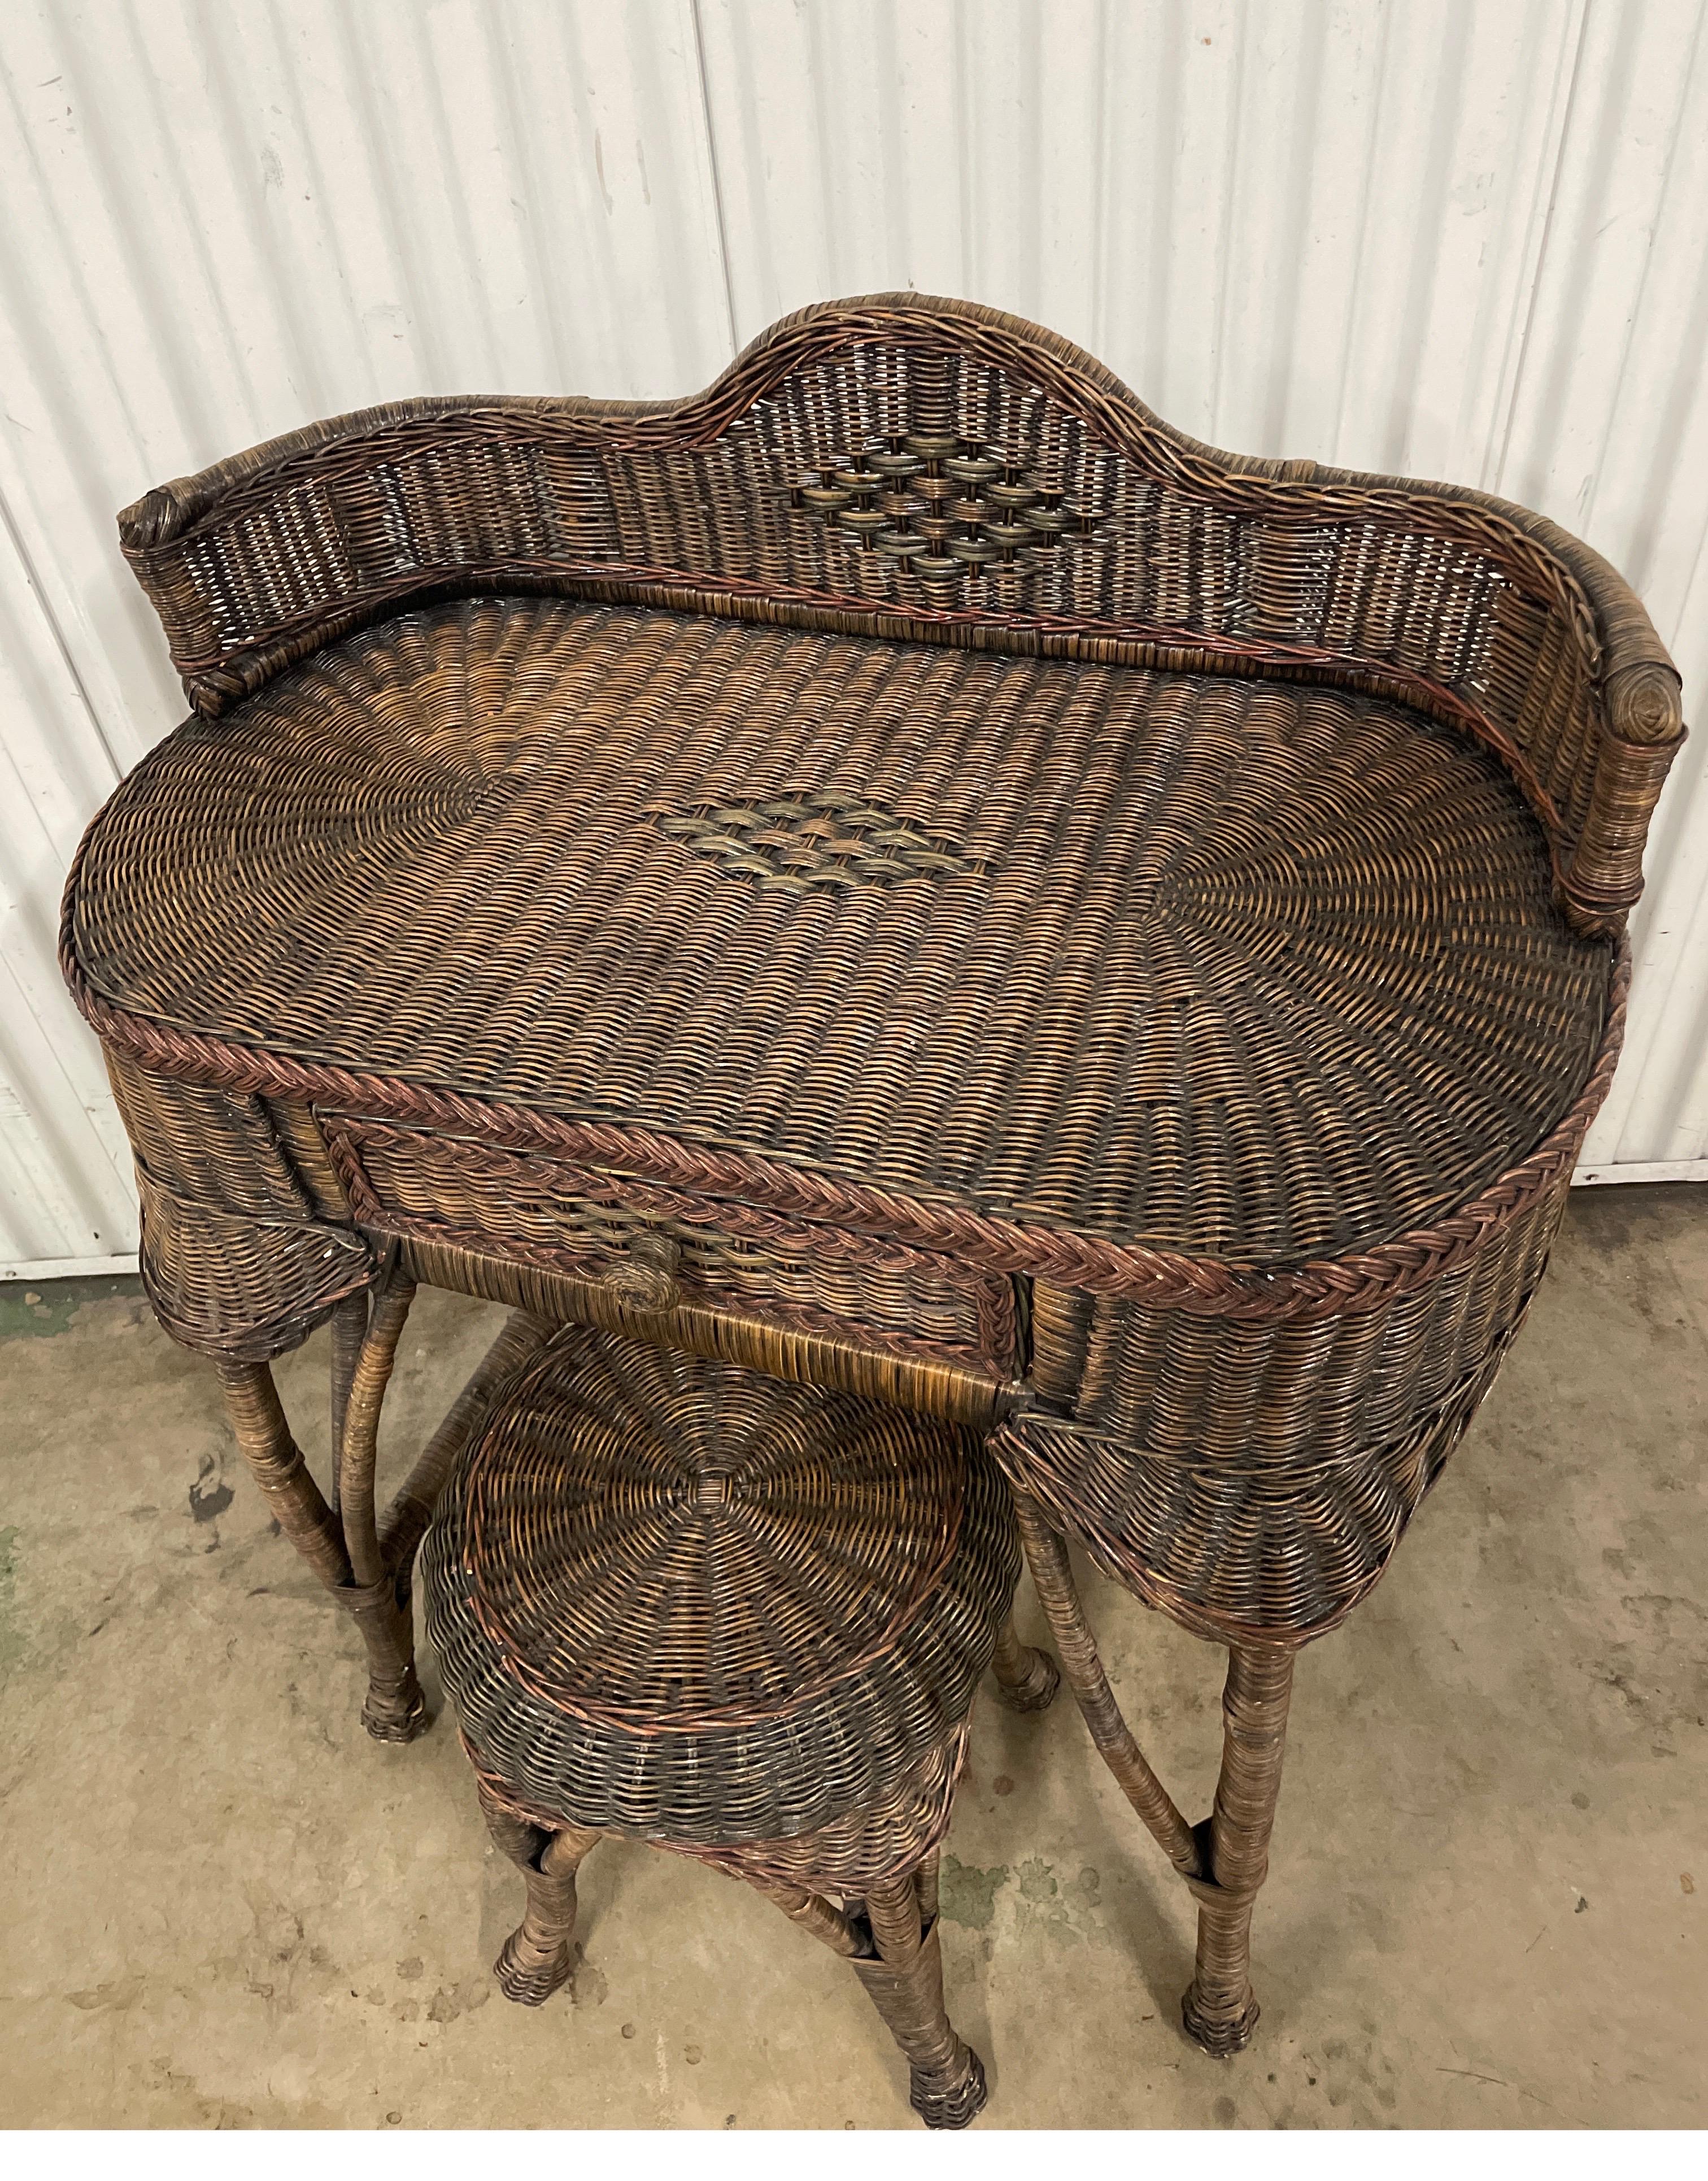 Vintage wicker dressing table / writing table with stool. It is oval shaped with a raised galleried back. There is one center drawer.  This very versatile piece can be used as a dressing table or small desk. The height to top of writing surface is